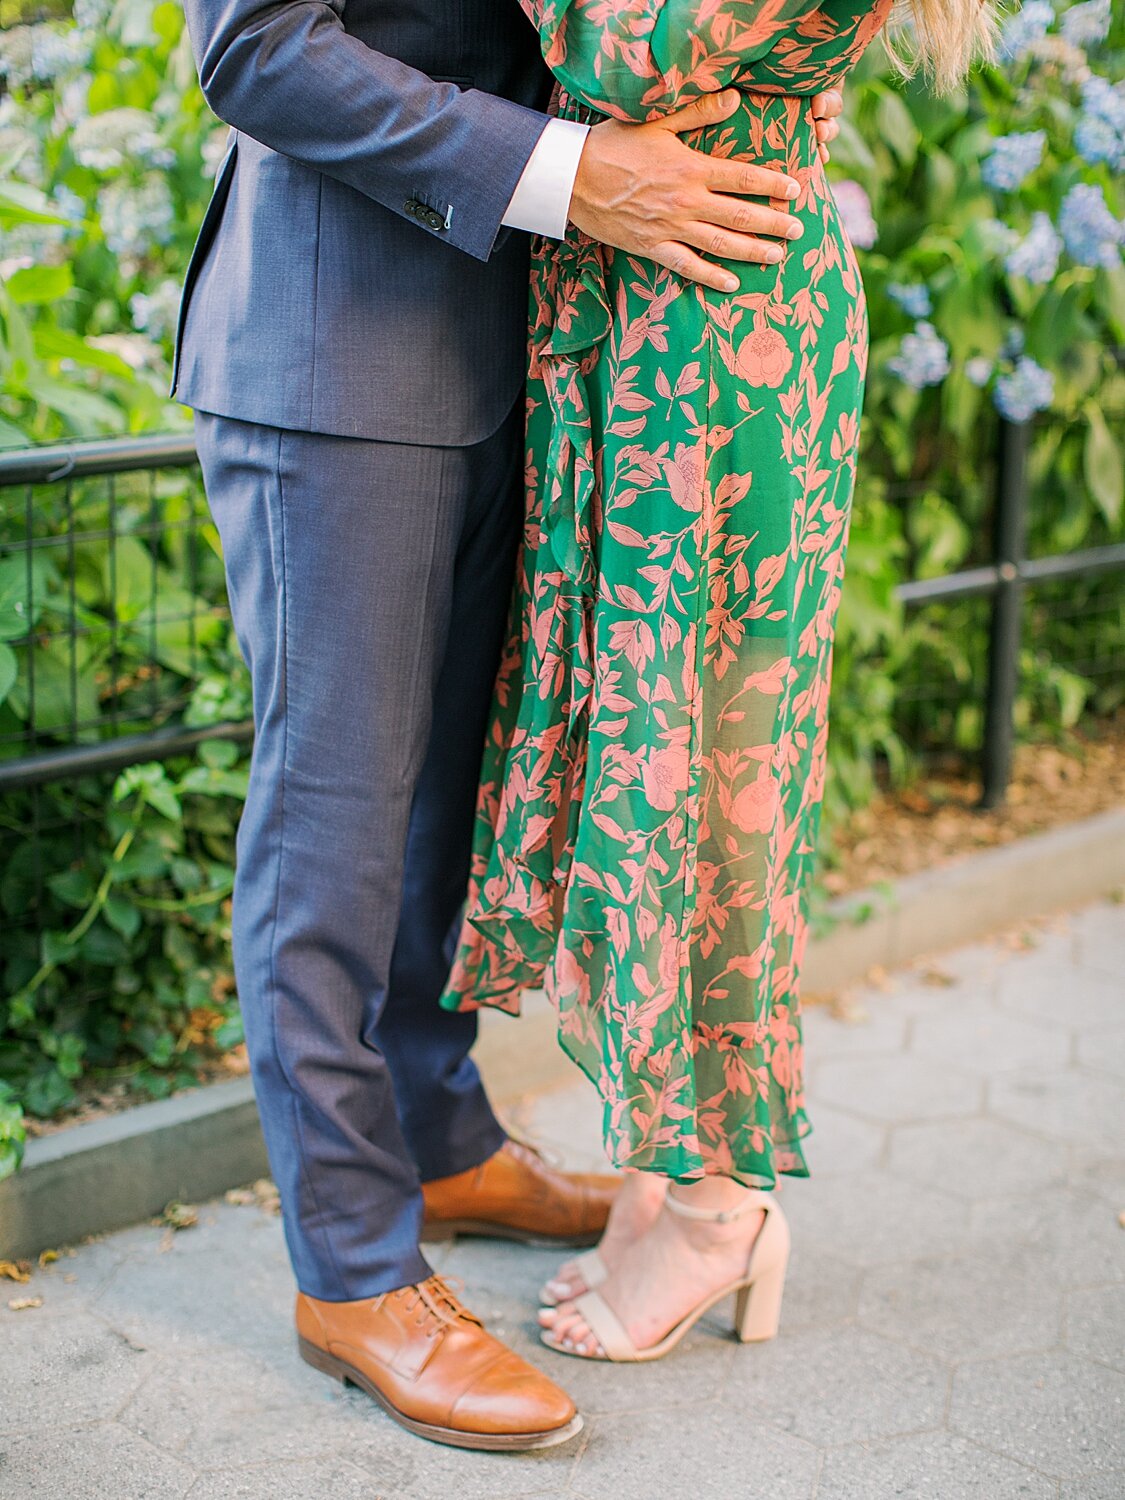 engagement portraits in the city | Asher Gardner Photography | The Village engagement session